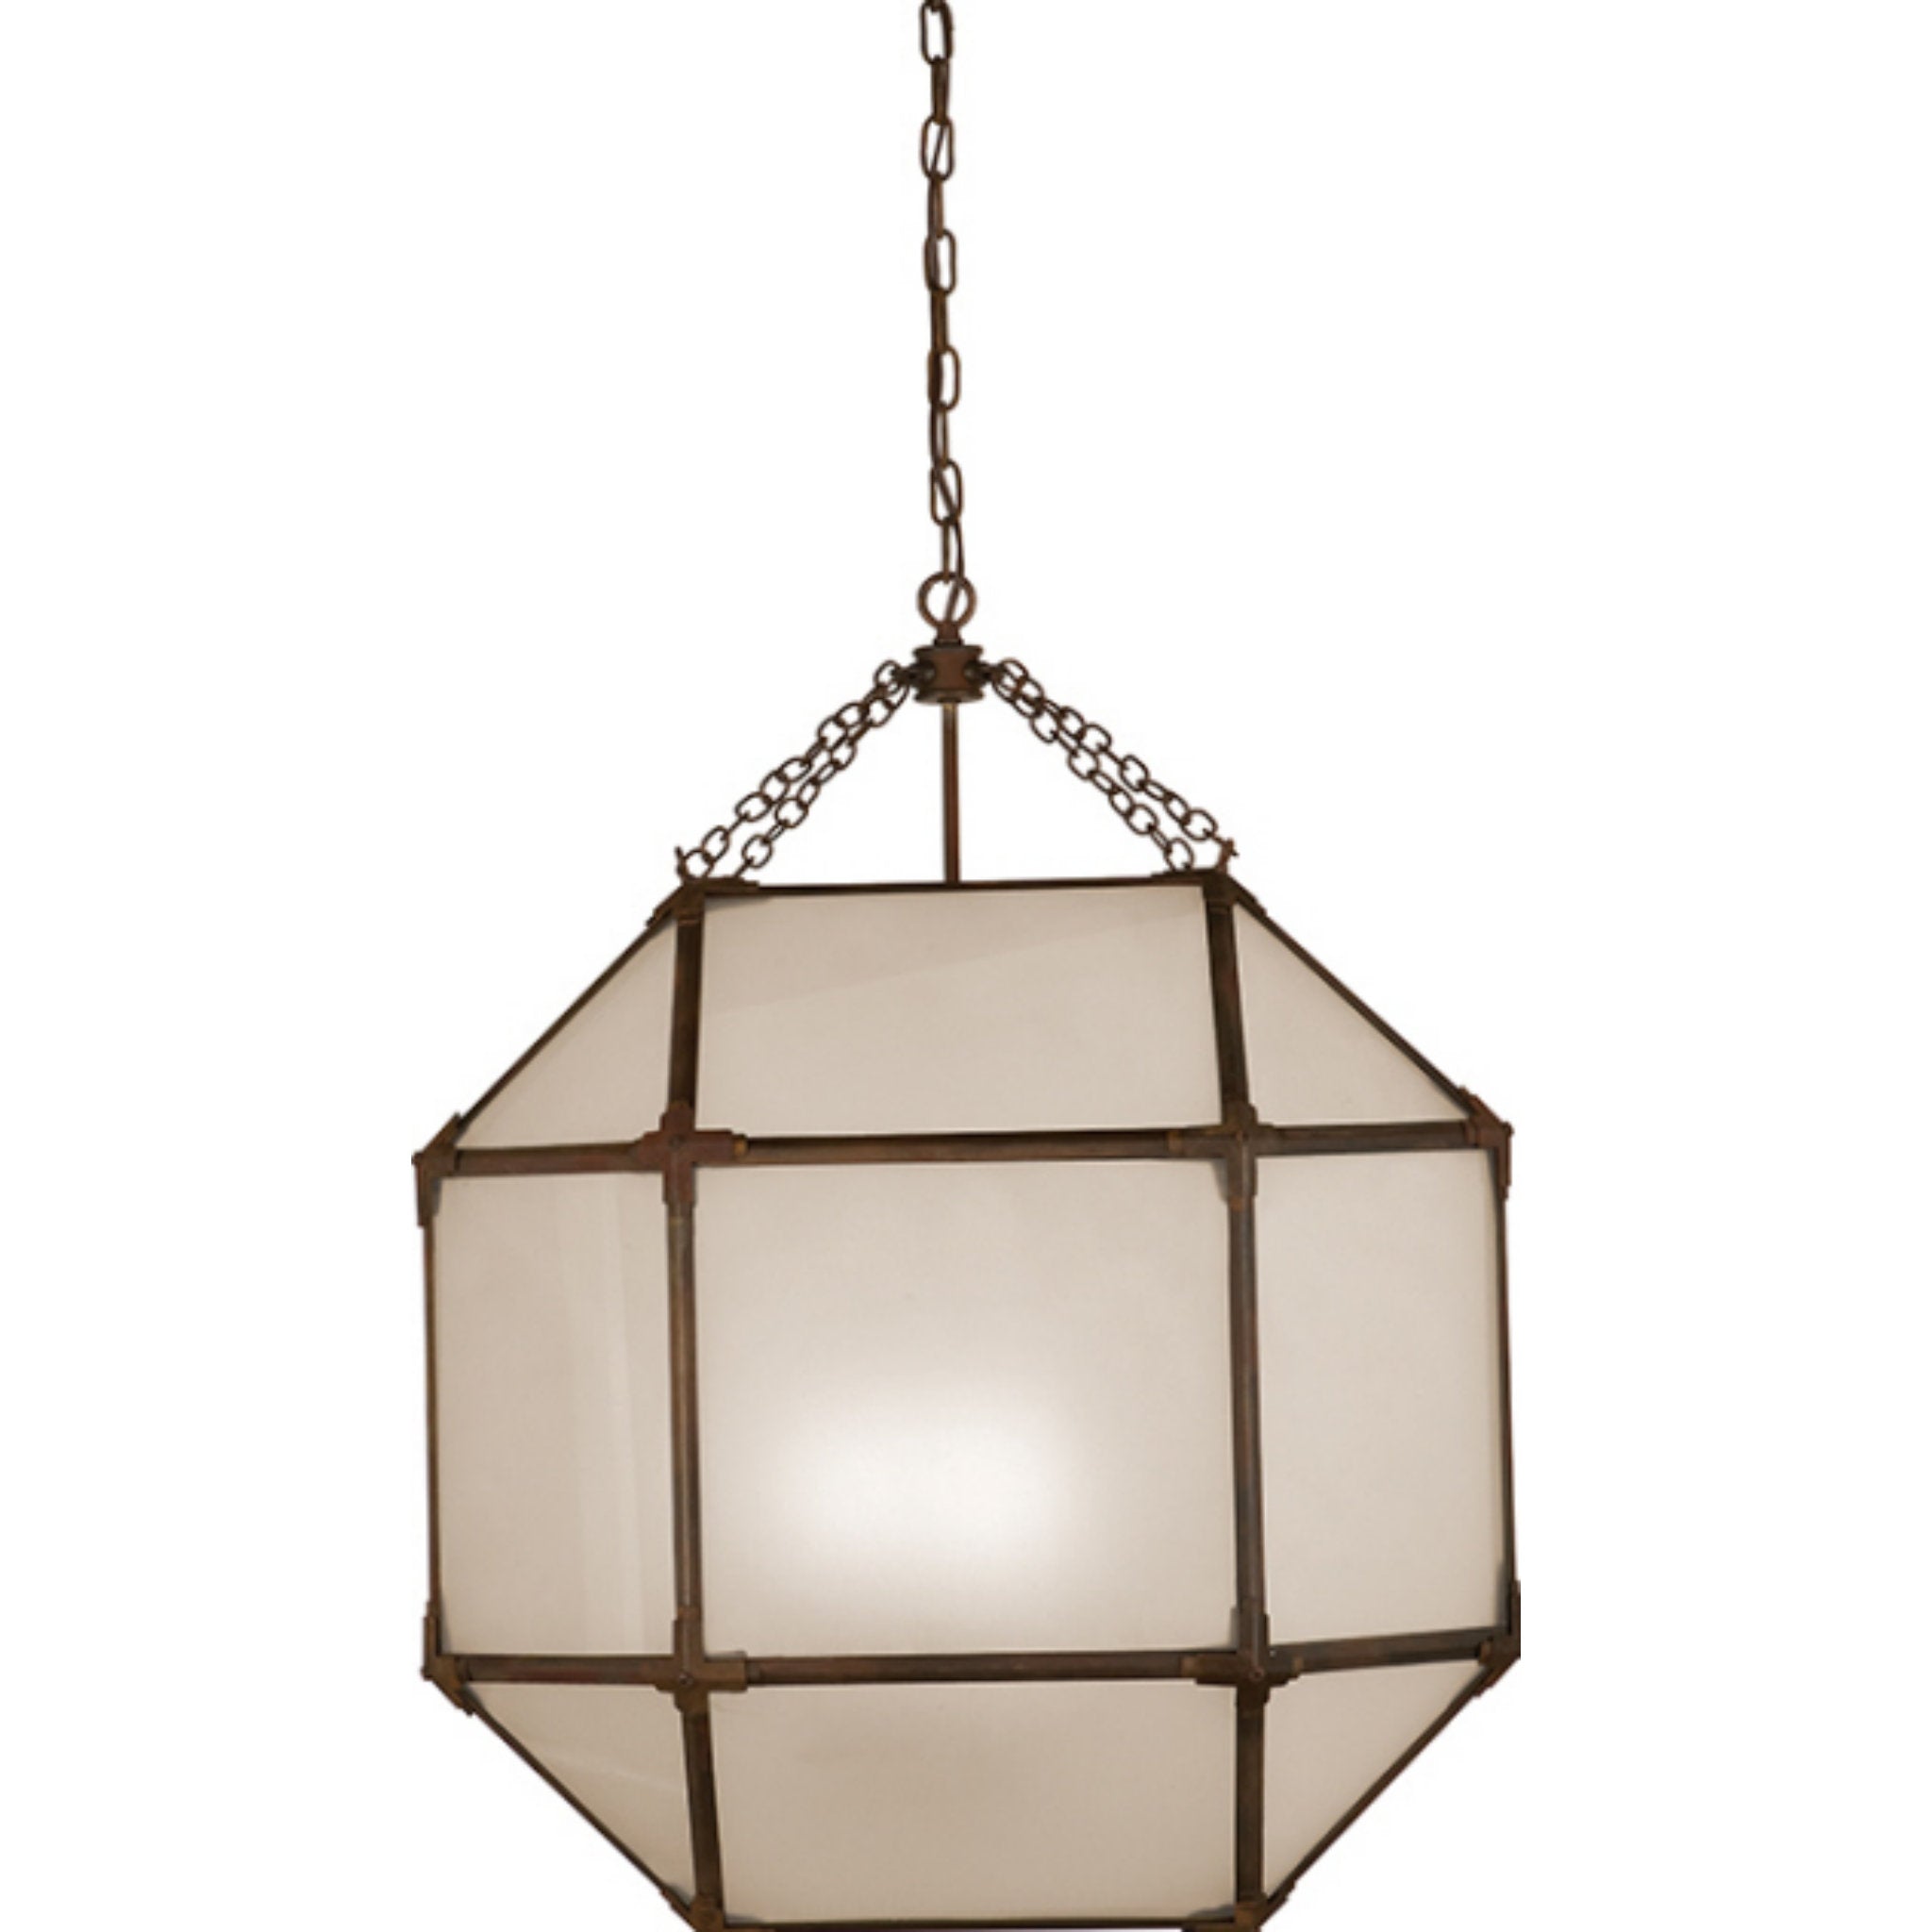 Suzanne Kasler Morris Large Lantern in Antique Zinc with Frosted Glass